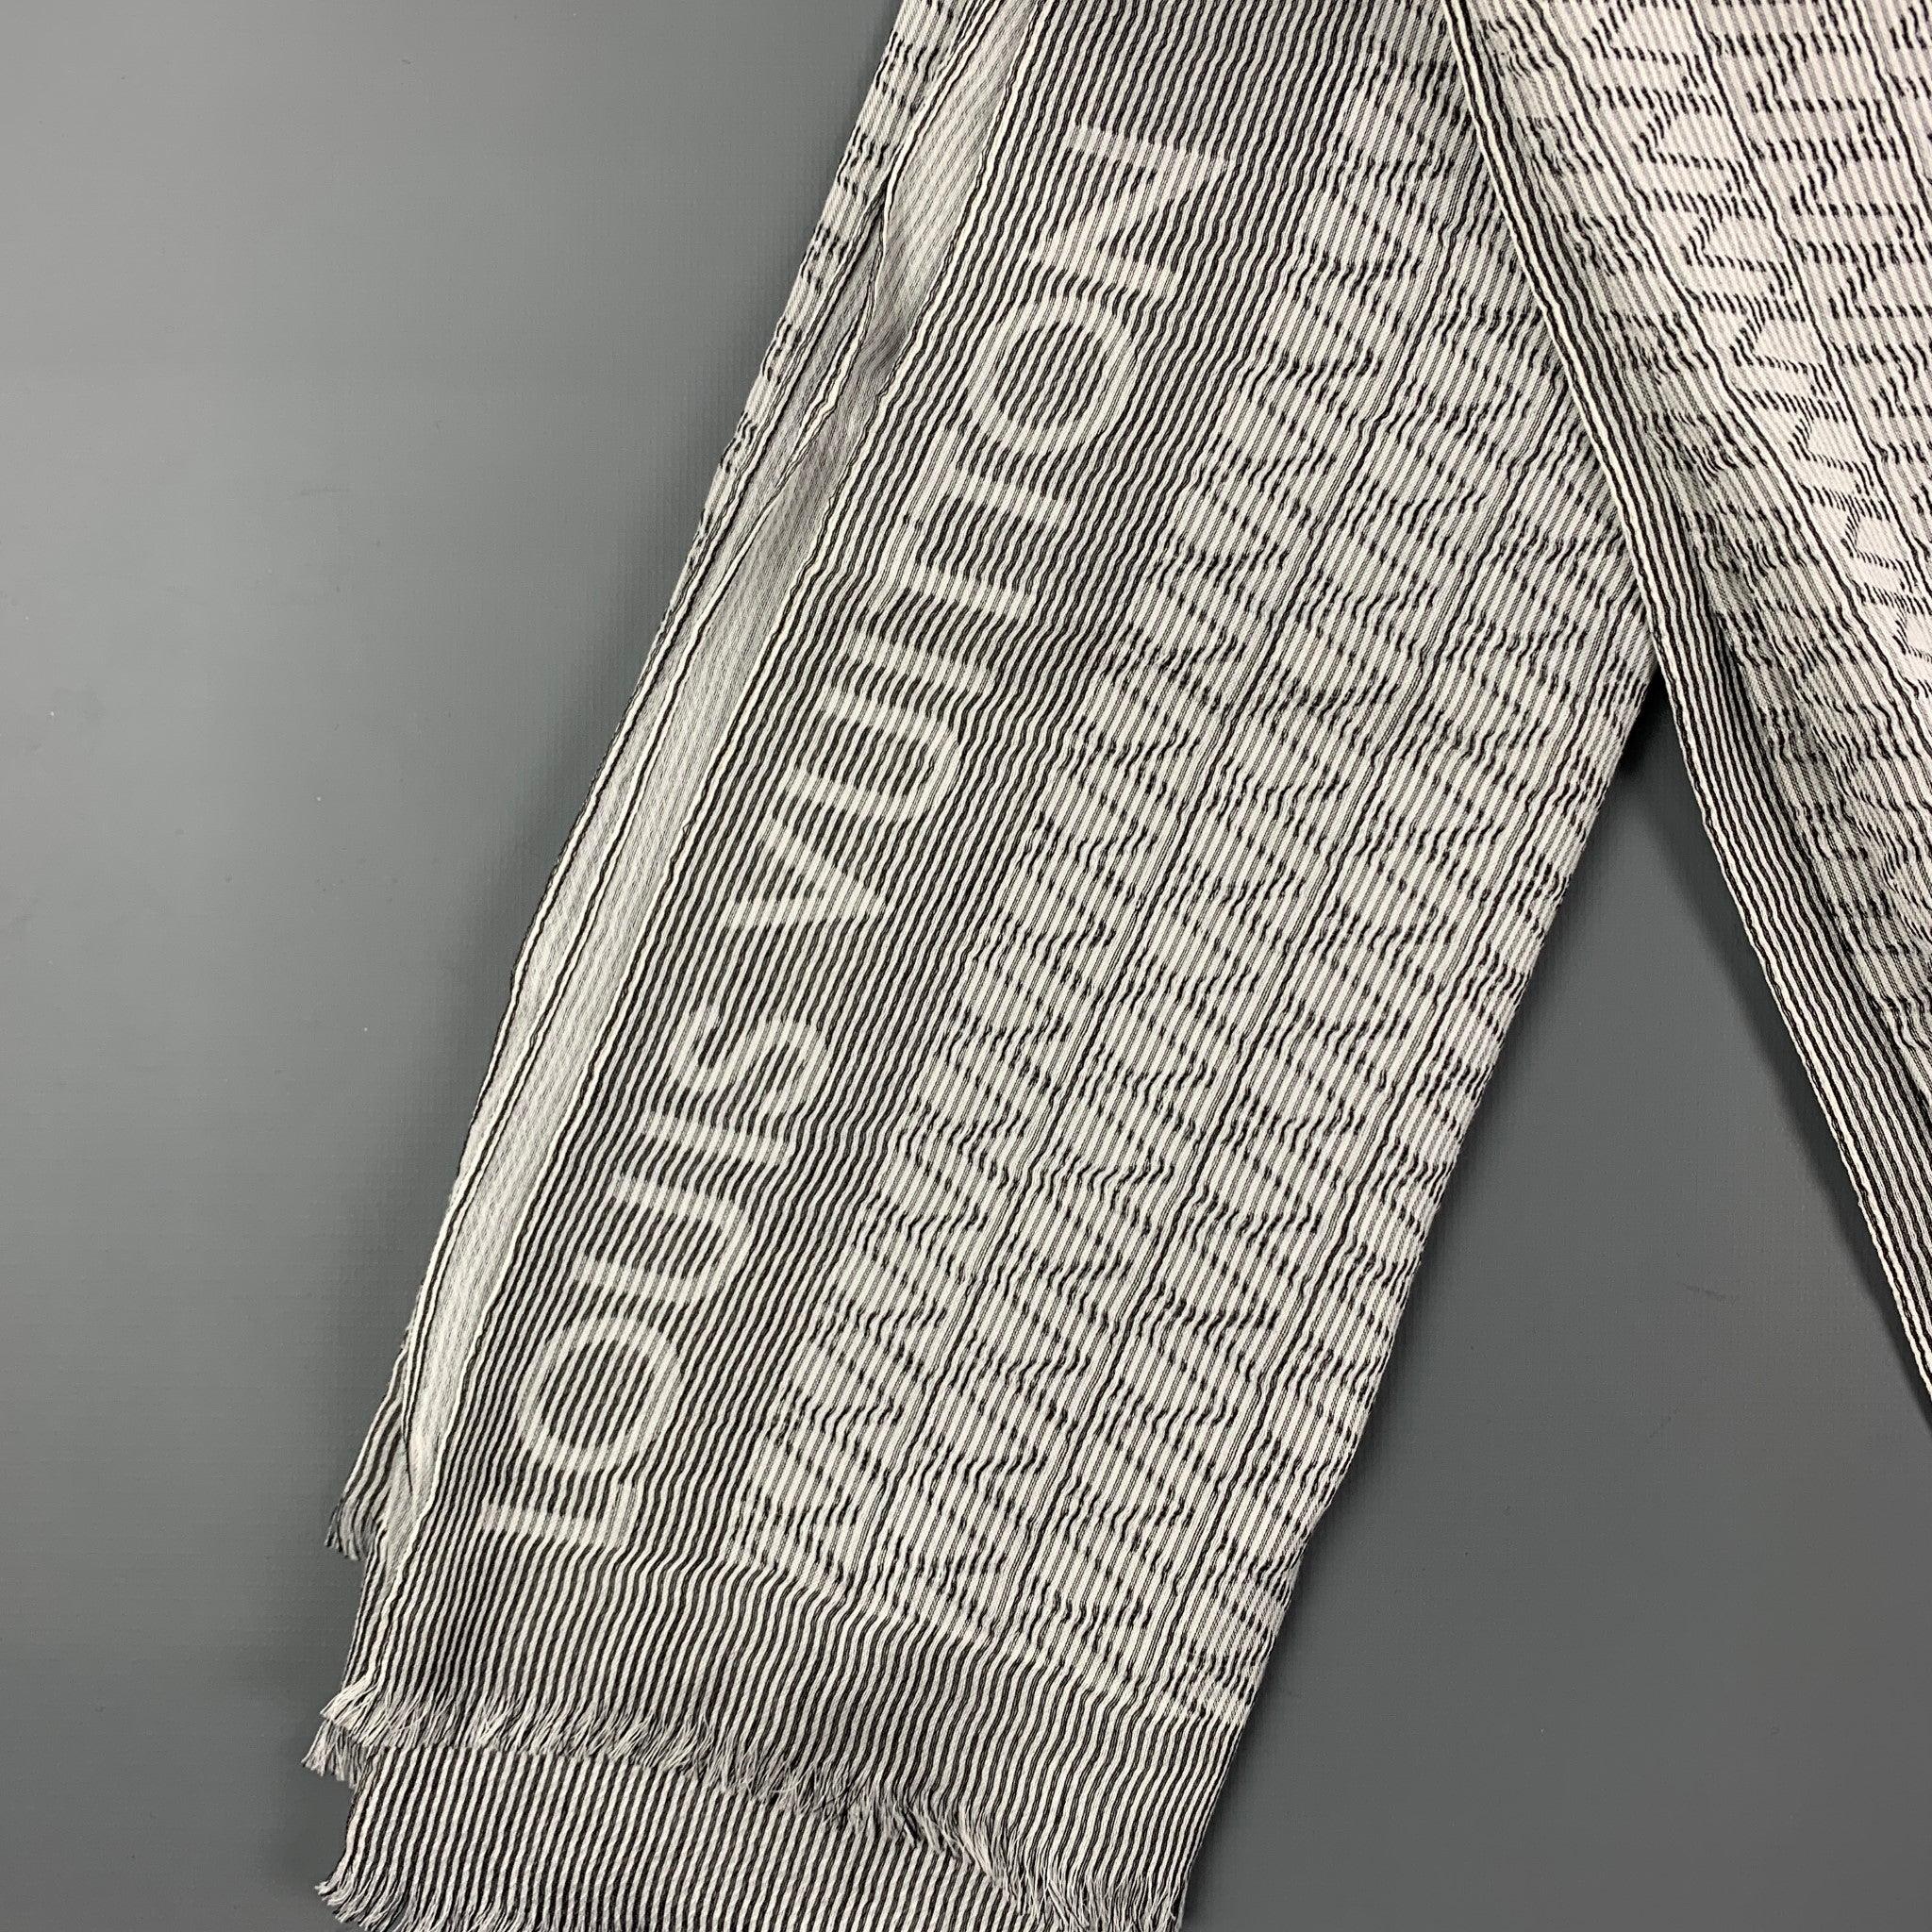 LOUIS VUITTON scarf comes in 
white & grey stripe cotton / silk with a fringe trim. Made in Italy.
Very Good
Pre-Owned Condition. 

Measurements: 
  74 inches  x 27 inches 
  
  
 
Reference: 120137
Category: Scarves
More Details
    
Brand:  LOUIS